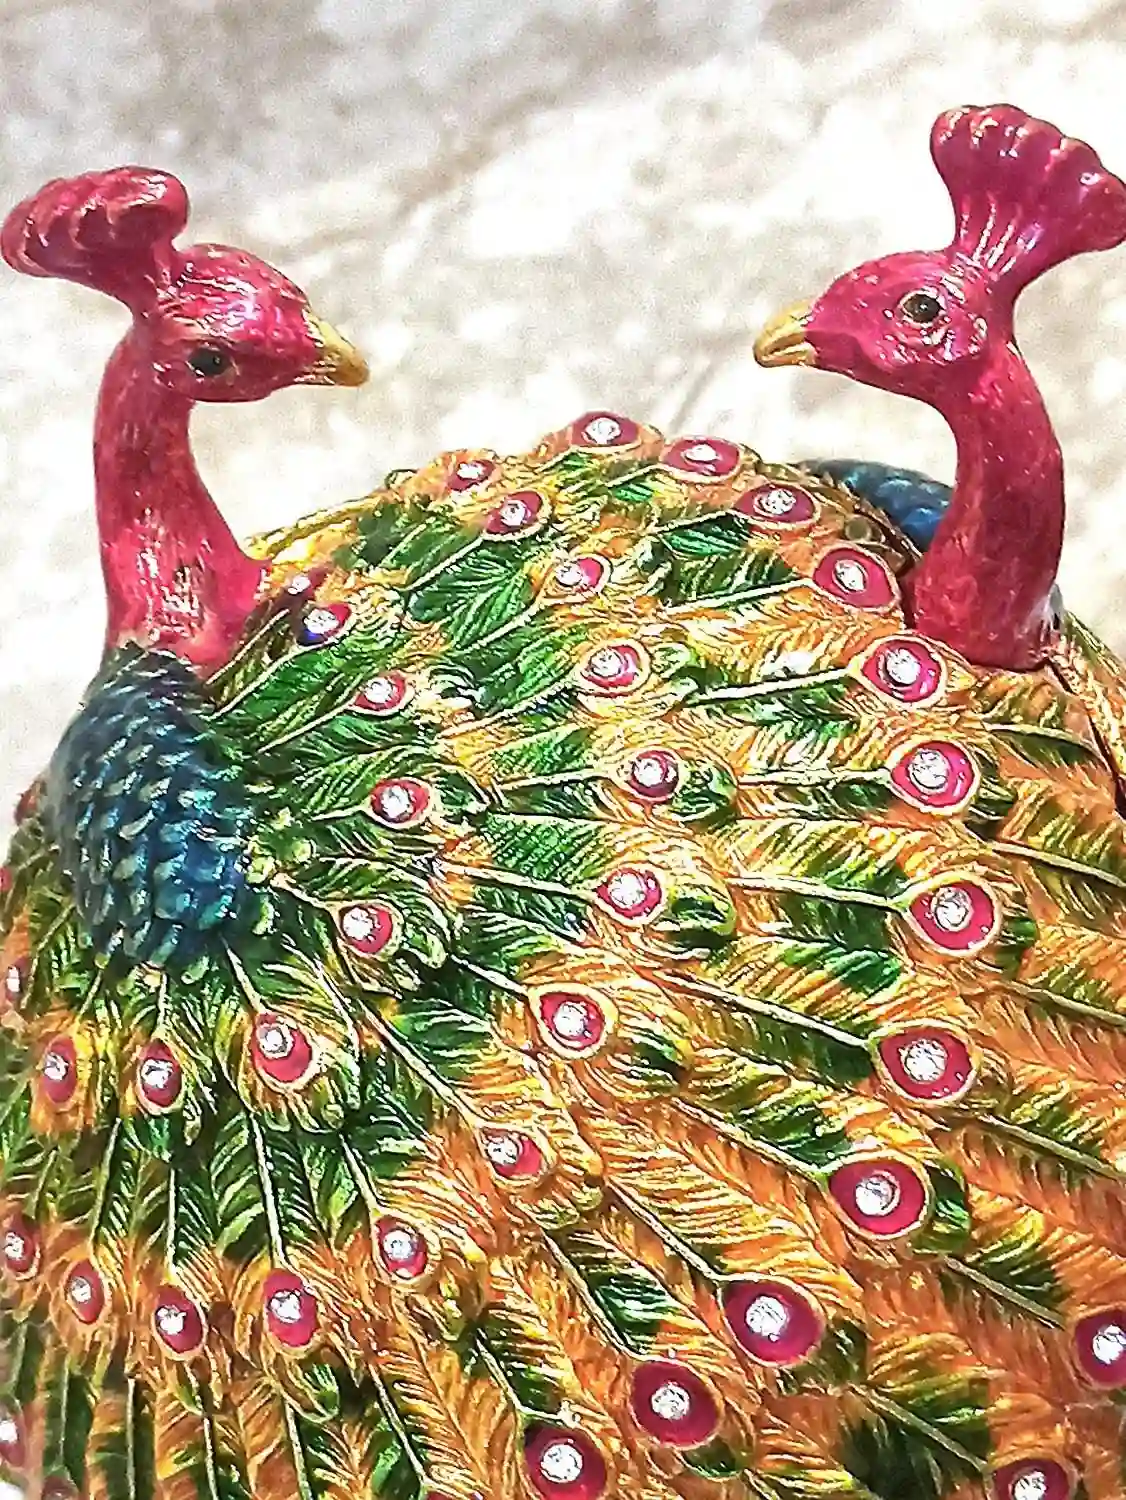 XL Peacock Faberge egg style, Peacock Jewelry Box, Peacock Keepsake box, Peacock Box, Peacock Lover Gift, Handmade, Peacock Gifts, HANDSET 